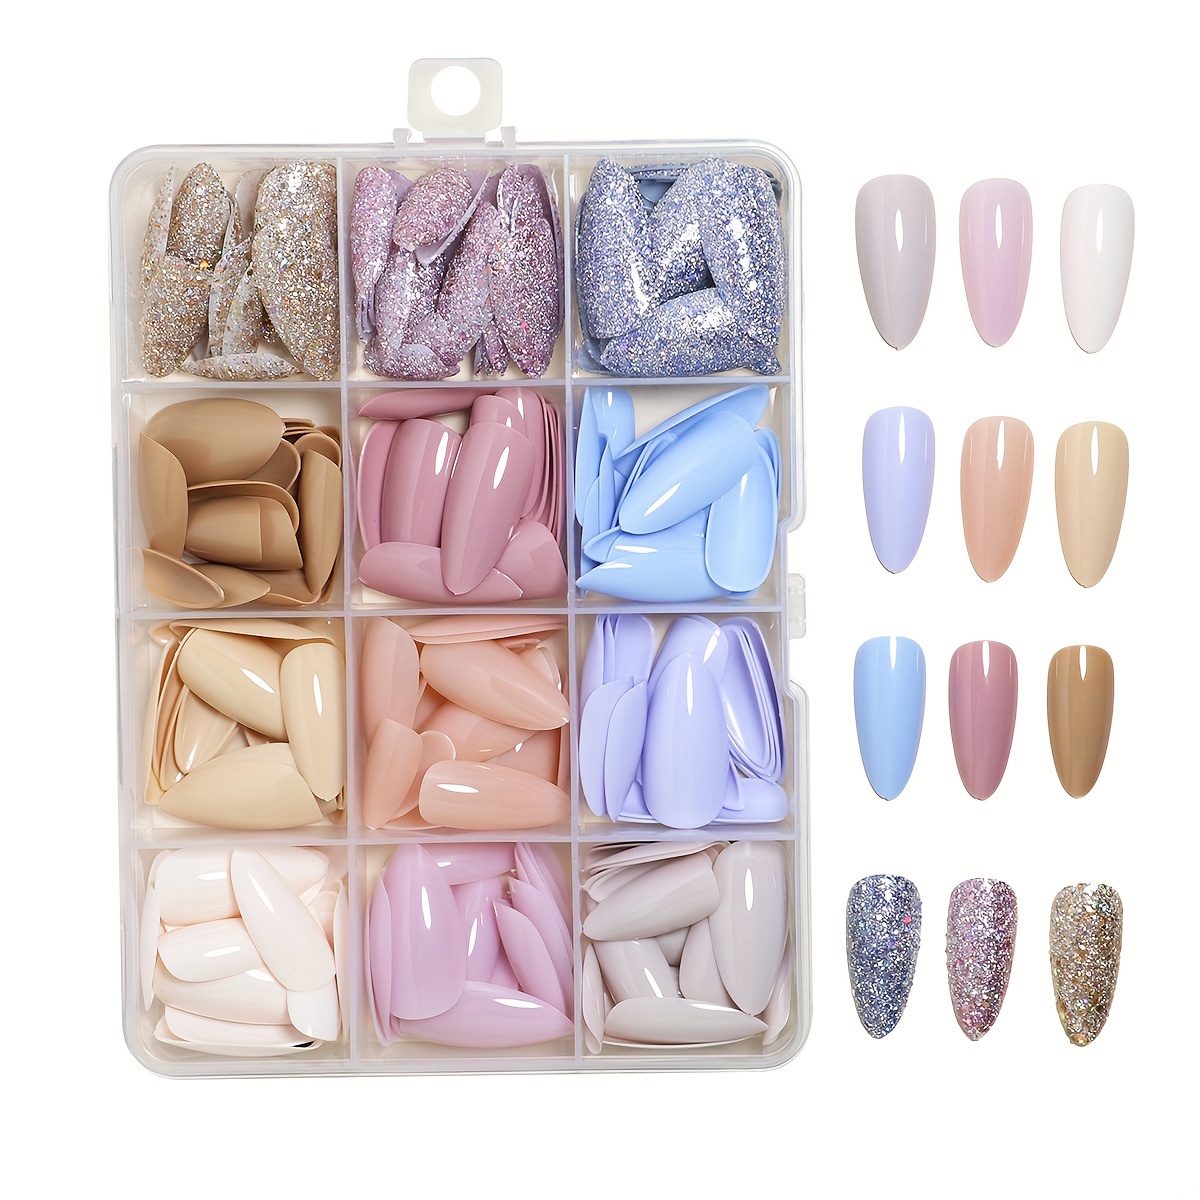 

288 Pcs 12 Different Colors Glossy Almond Shaped False Nails, Medium Almond Nails Full Coverage Fake Nails With Storage Box For Women And Girls